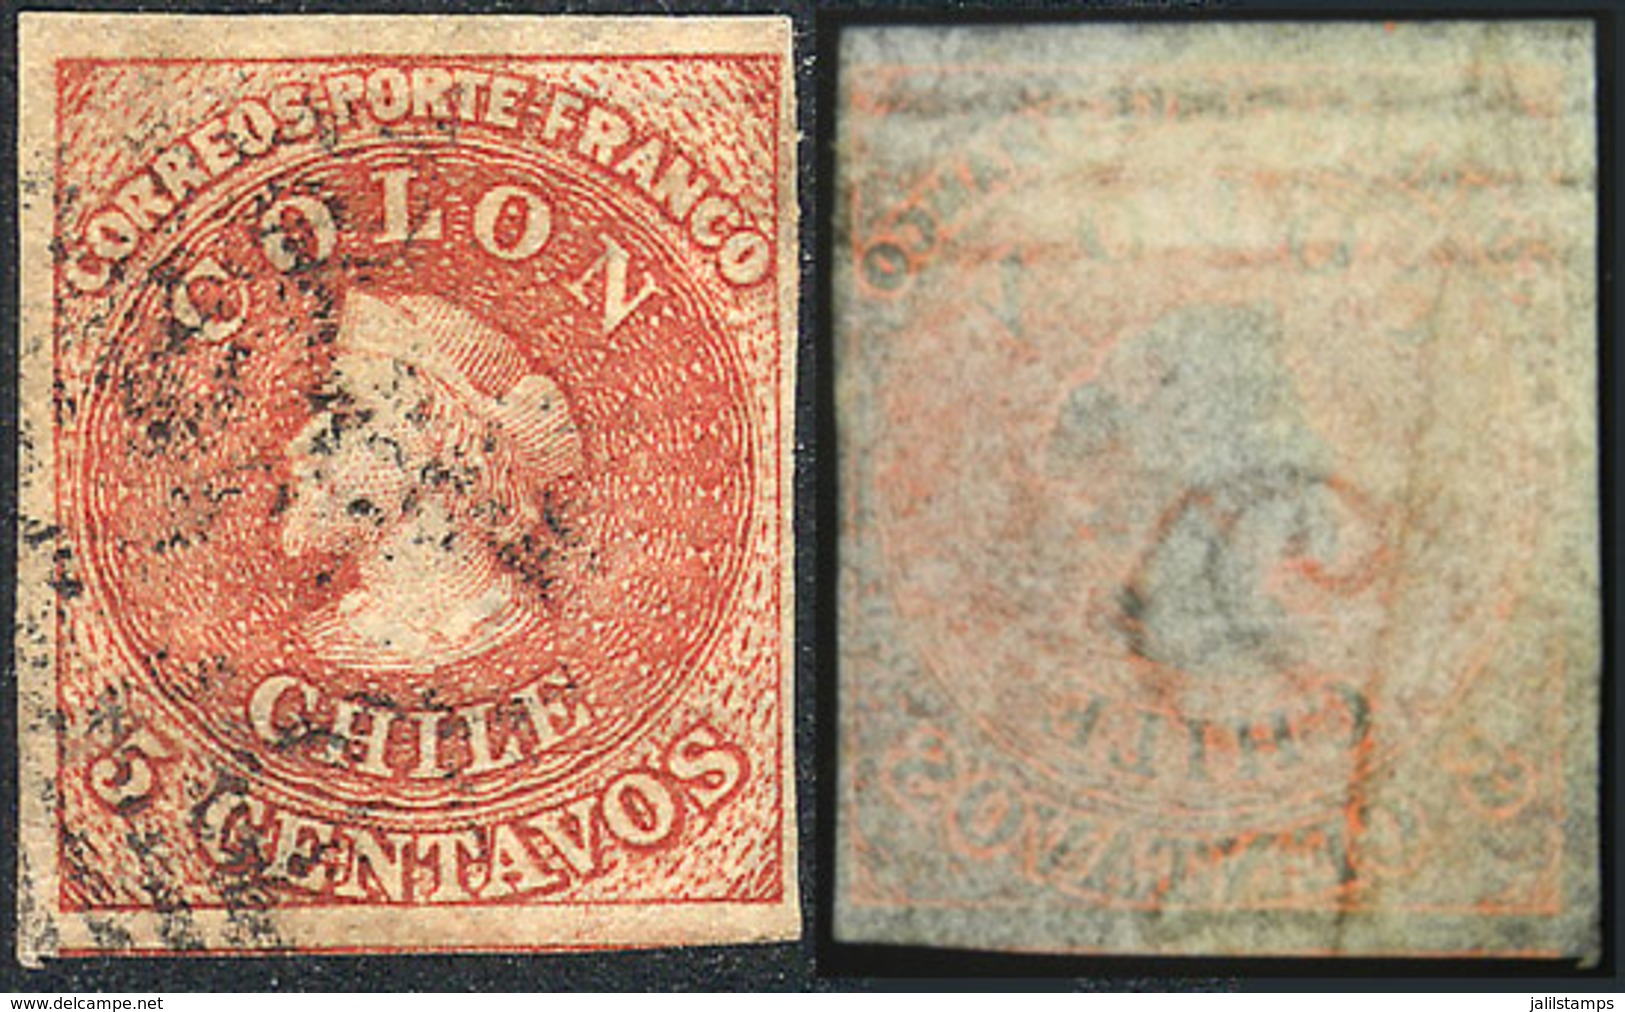 CHILE: Yvert 8, With Watermark Inverted (position 3) And 3 Horizontal Lines At Top, Wide Margins, VF Quality! - Chile